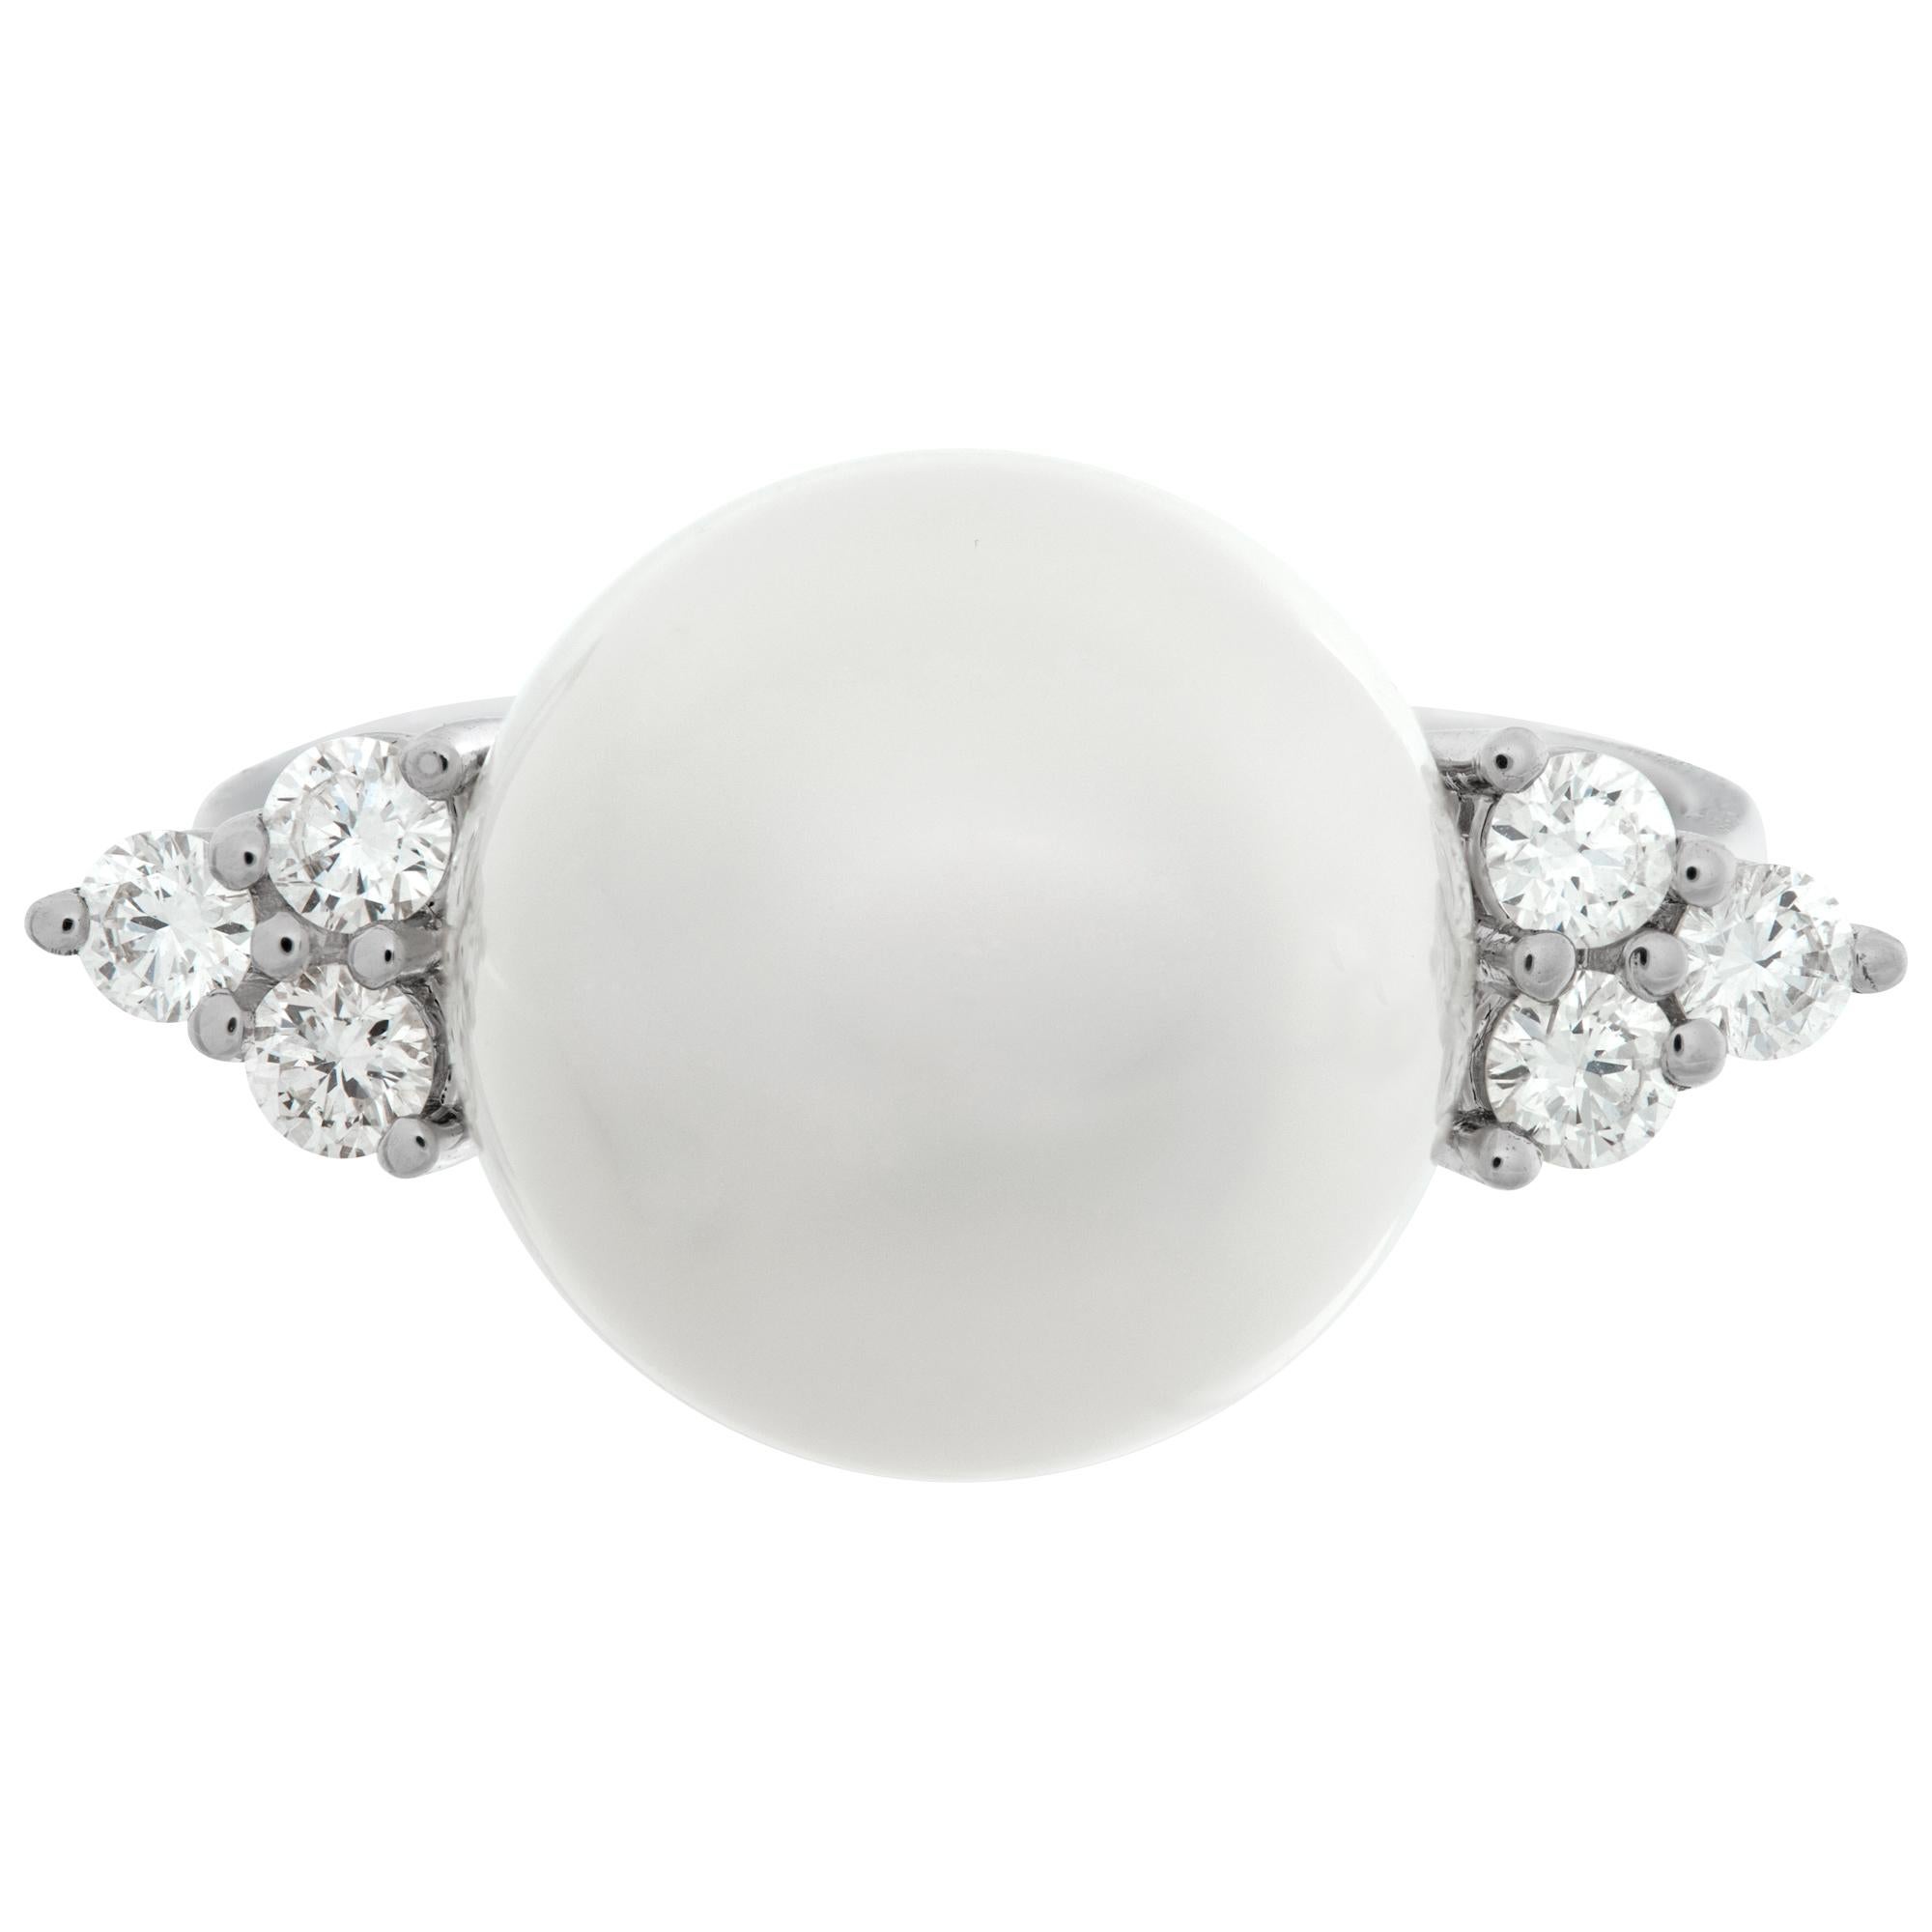 South sea pearl (11.5 x12mm) & diamonds ring, set in 18k white gold with round brilliant cut diamonds total approximate weight: 0.36 carat, estimate: G-H color, VS clarity. Size 6.75.This Pearl/diamond ring is currently size 6.75 and some items can